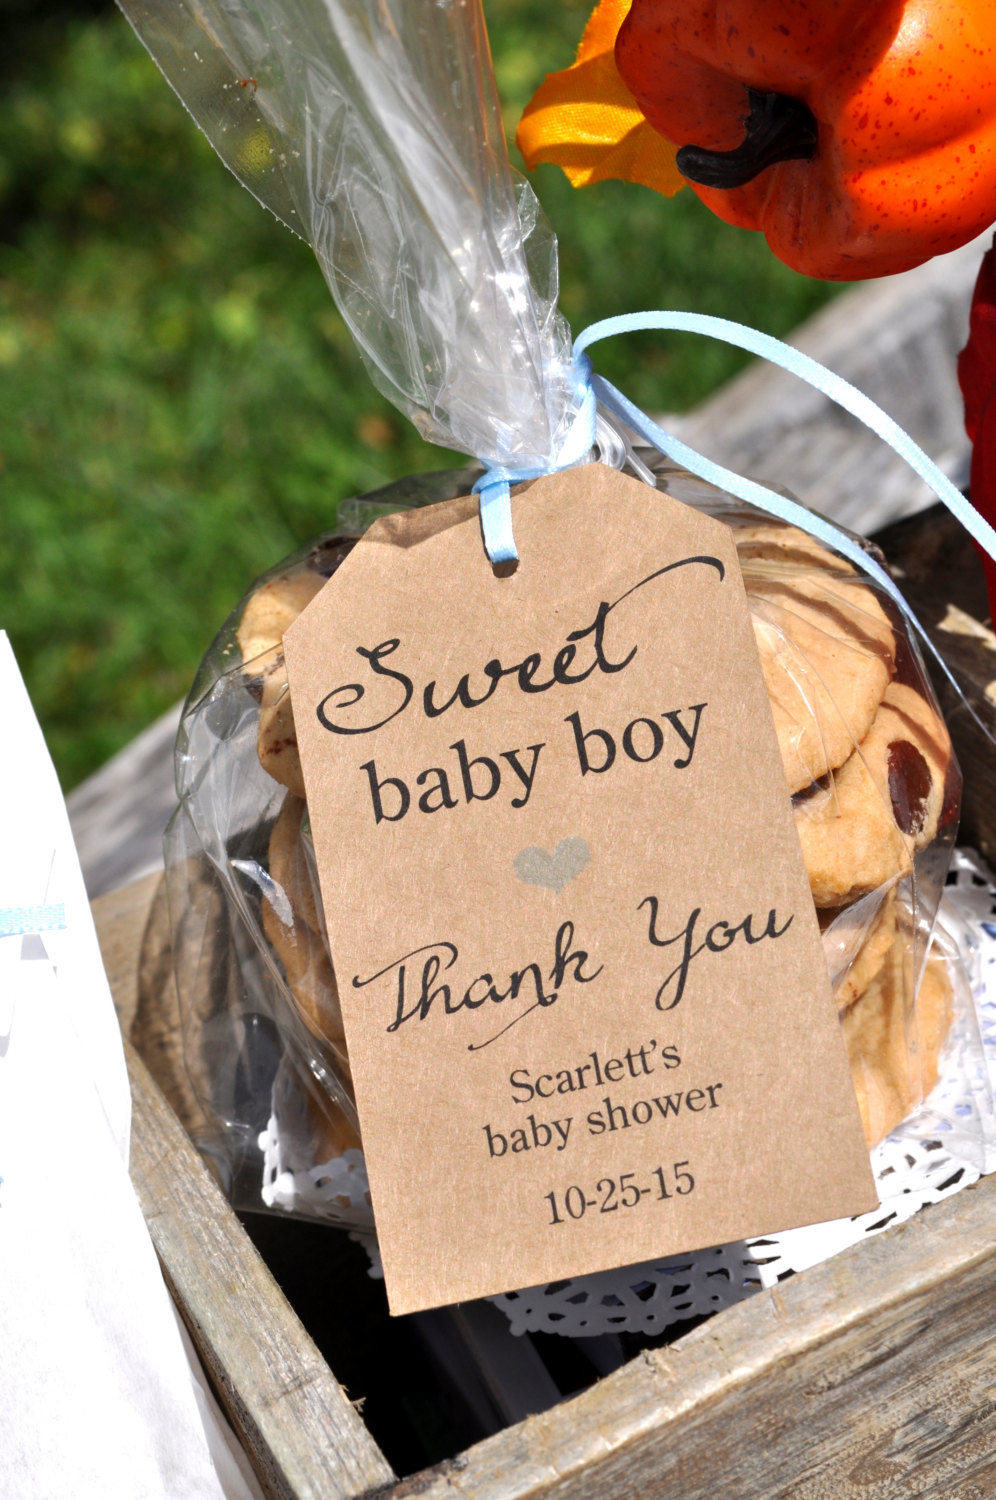 Baby Boy Shower Party Favors
 Rustic Boys Baby Shower Favor Tags Sweet Baby Boy Kraft